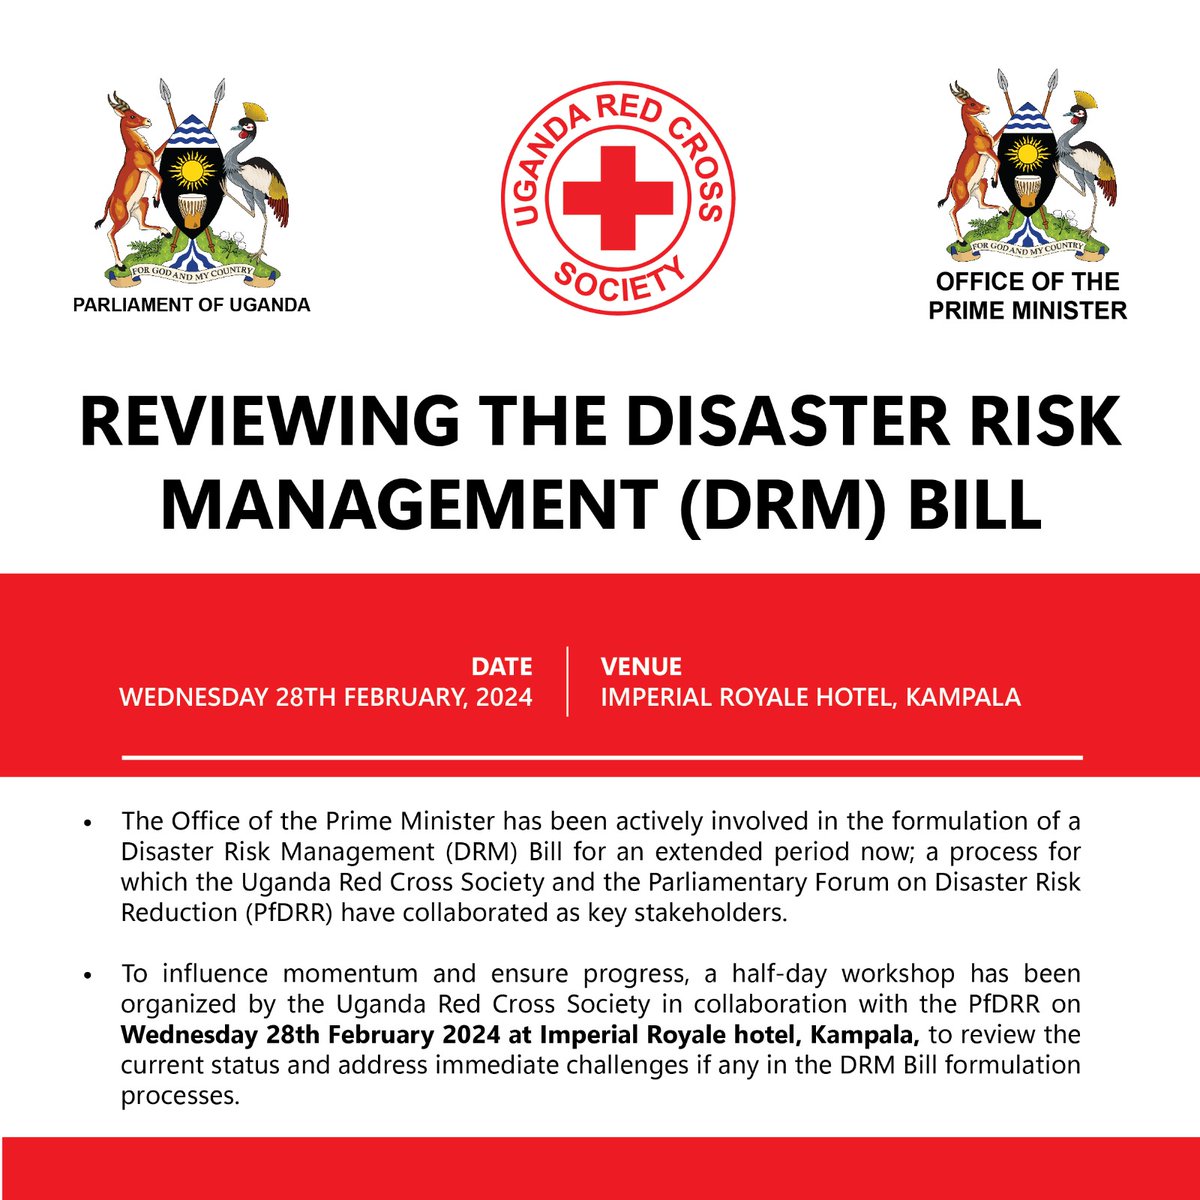 Today, @opmdpm @OPMUganda @UgandaRedCross and Parliamentary Forum on Disaster Risk Reduction will meet to review the Disaster Management Bill for Uganda at imperial royale Hotel in Kampala. #DRMBillUg @Parliament_Ug